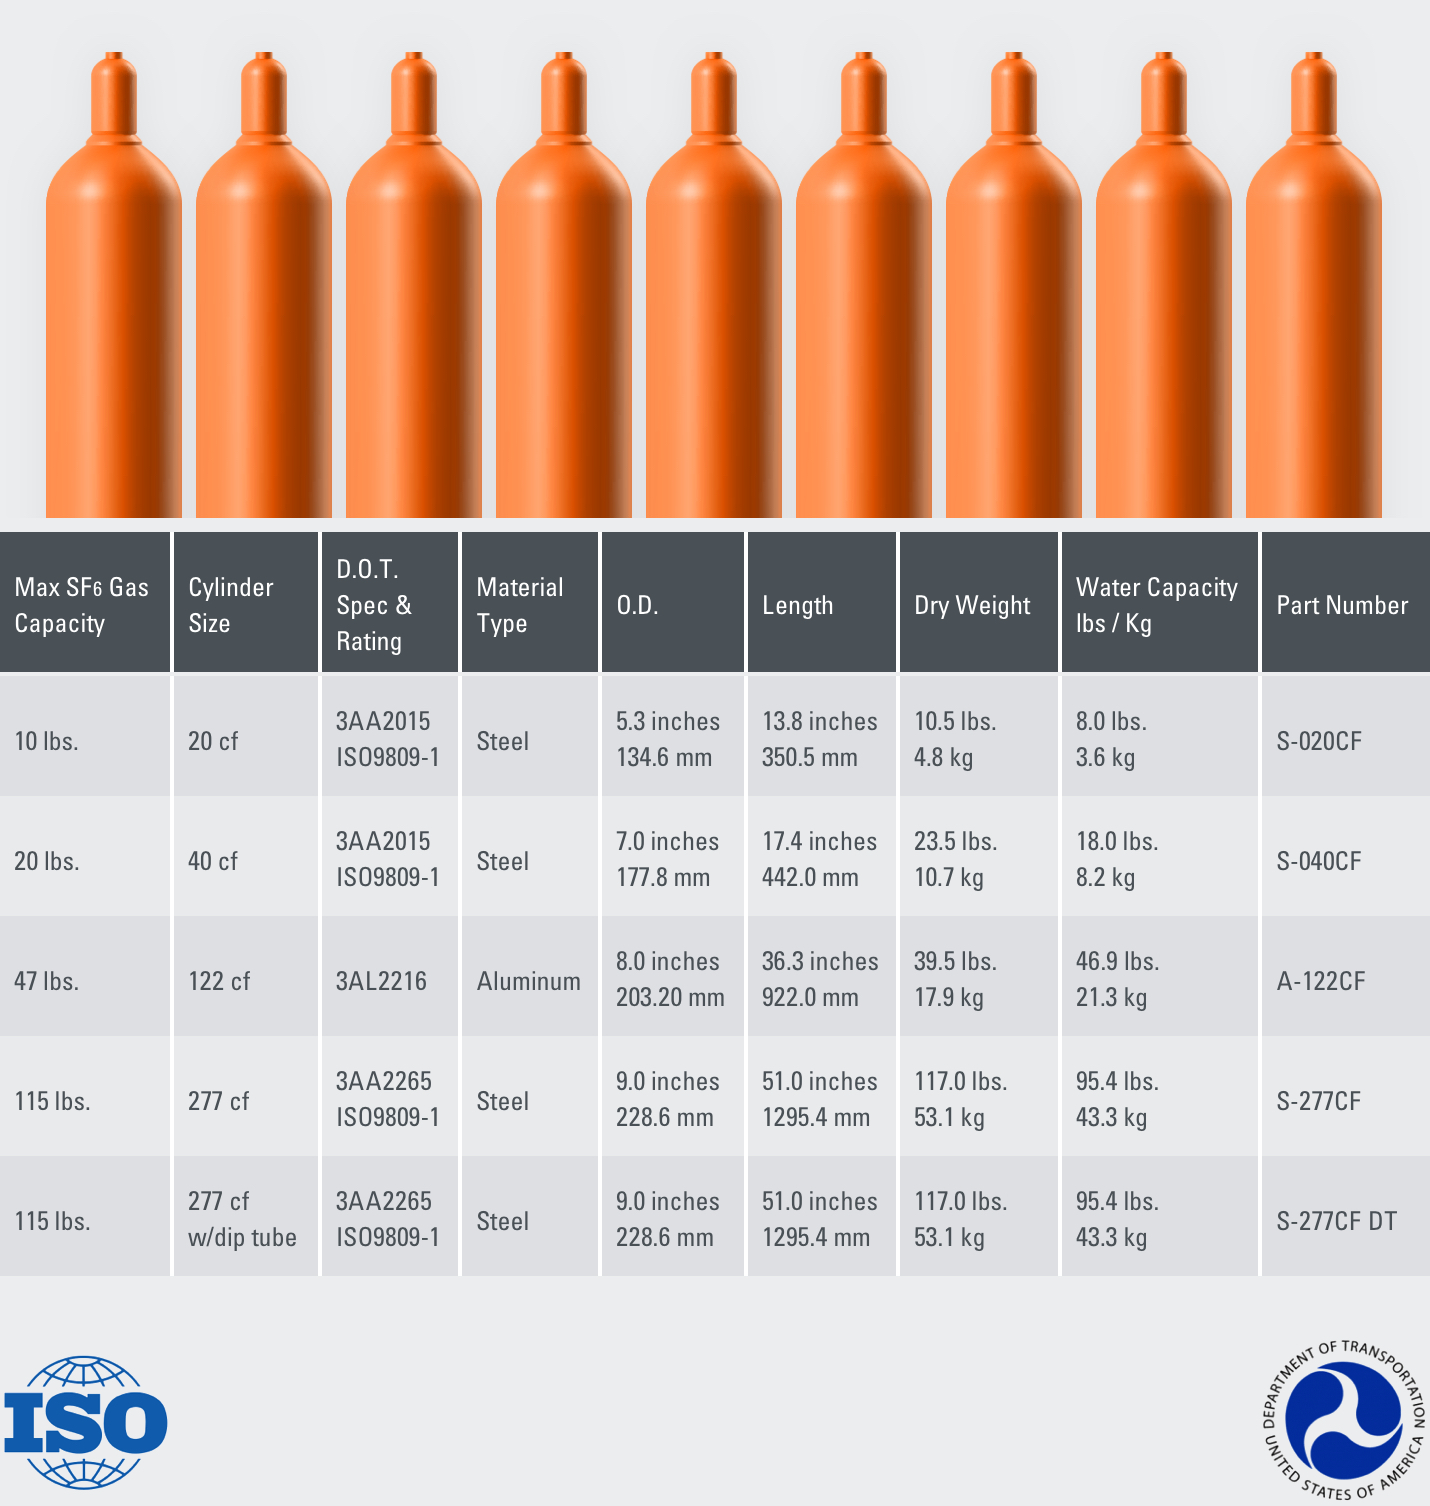 DILO SF6 Gas Cylinders (Bottles)